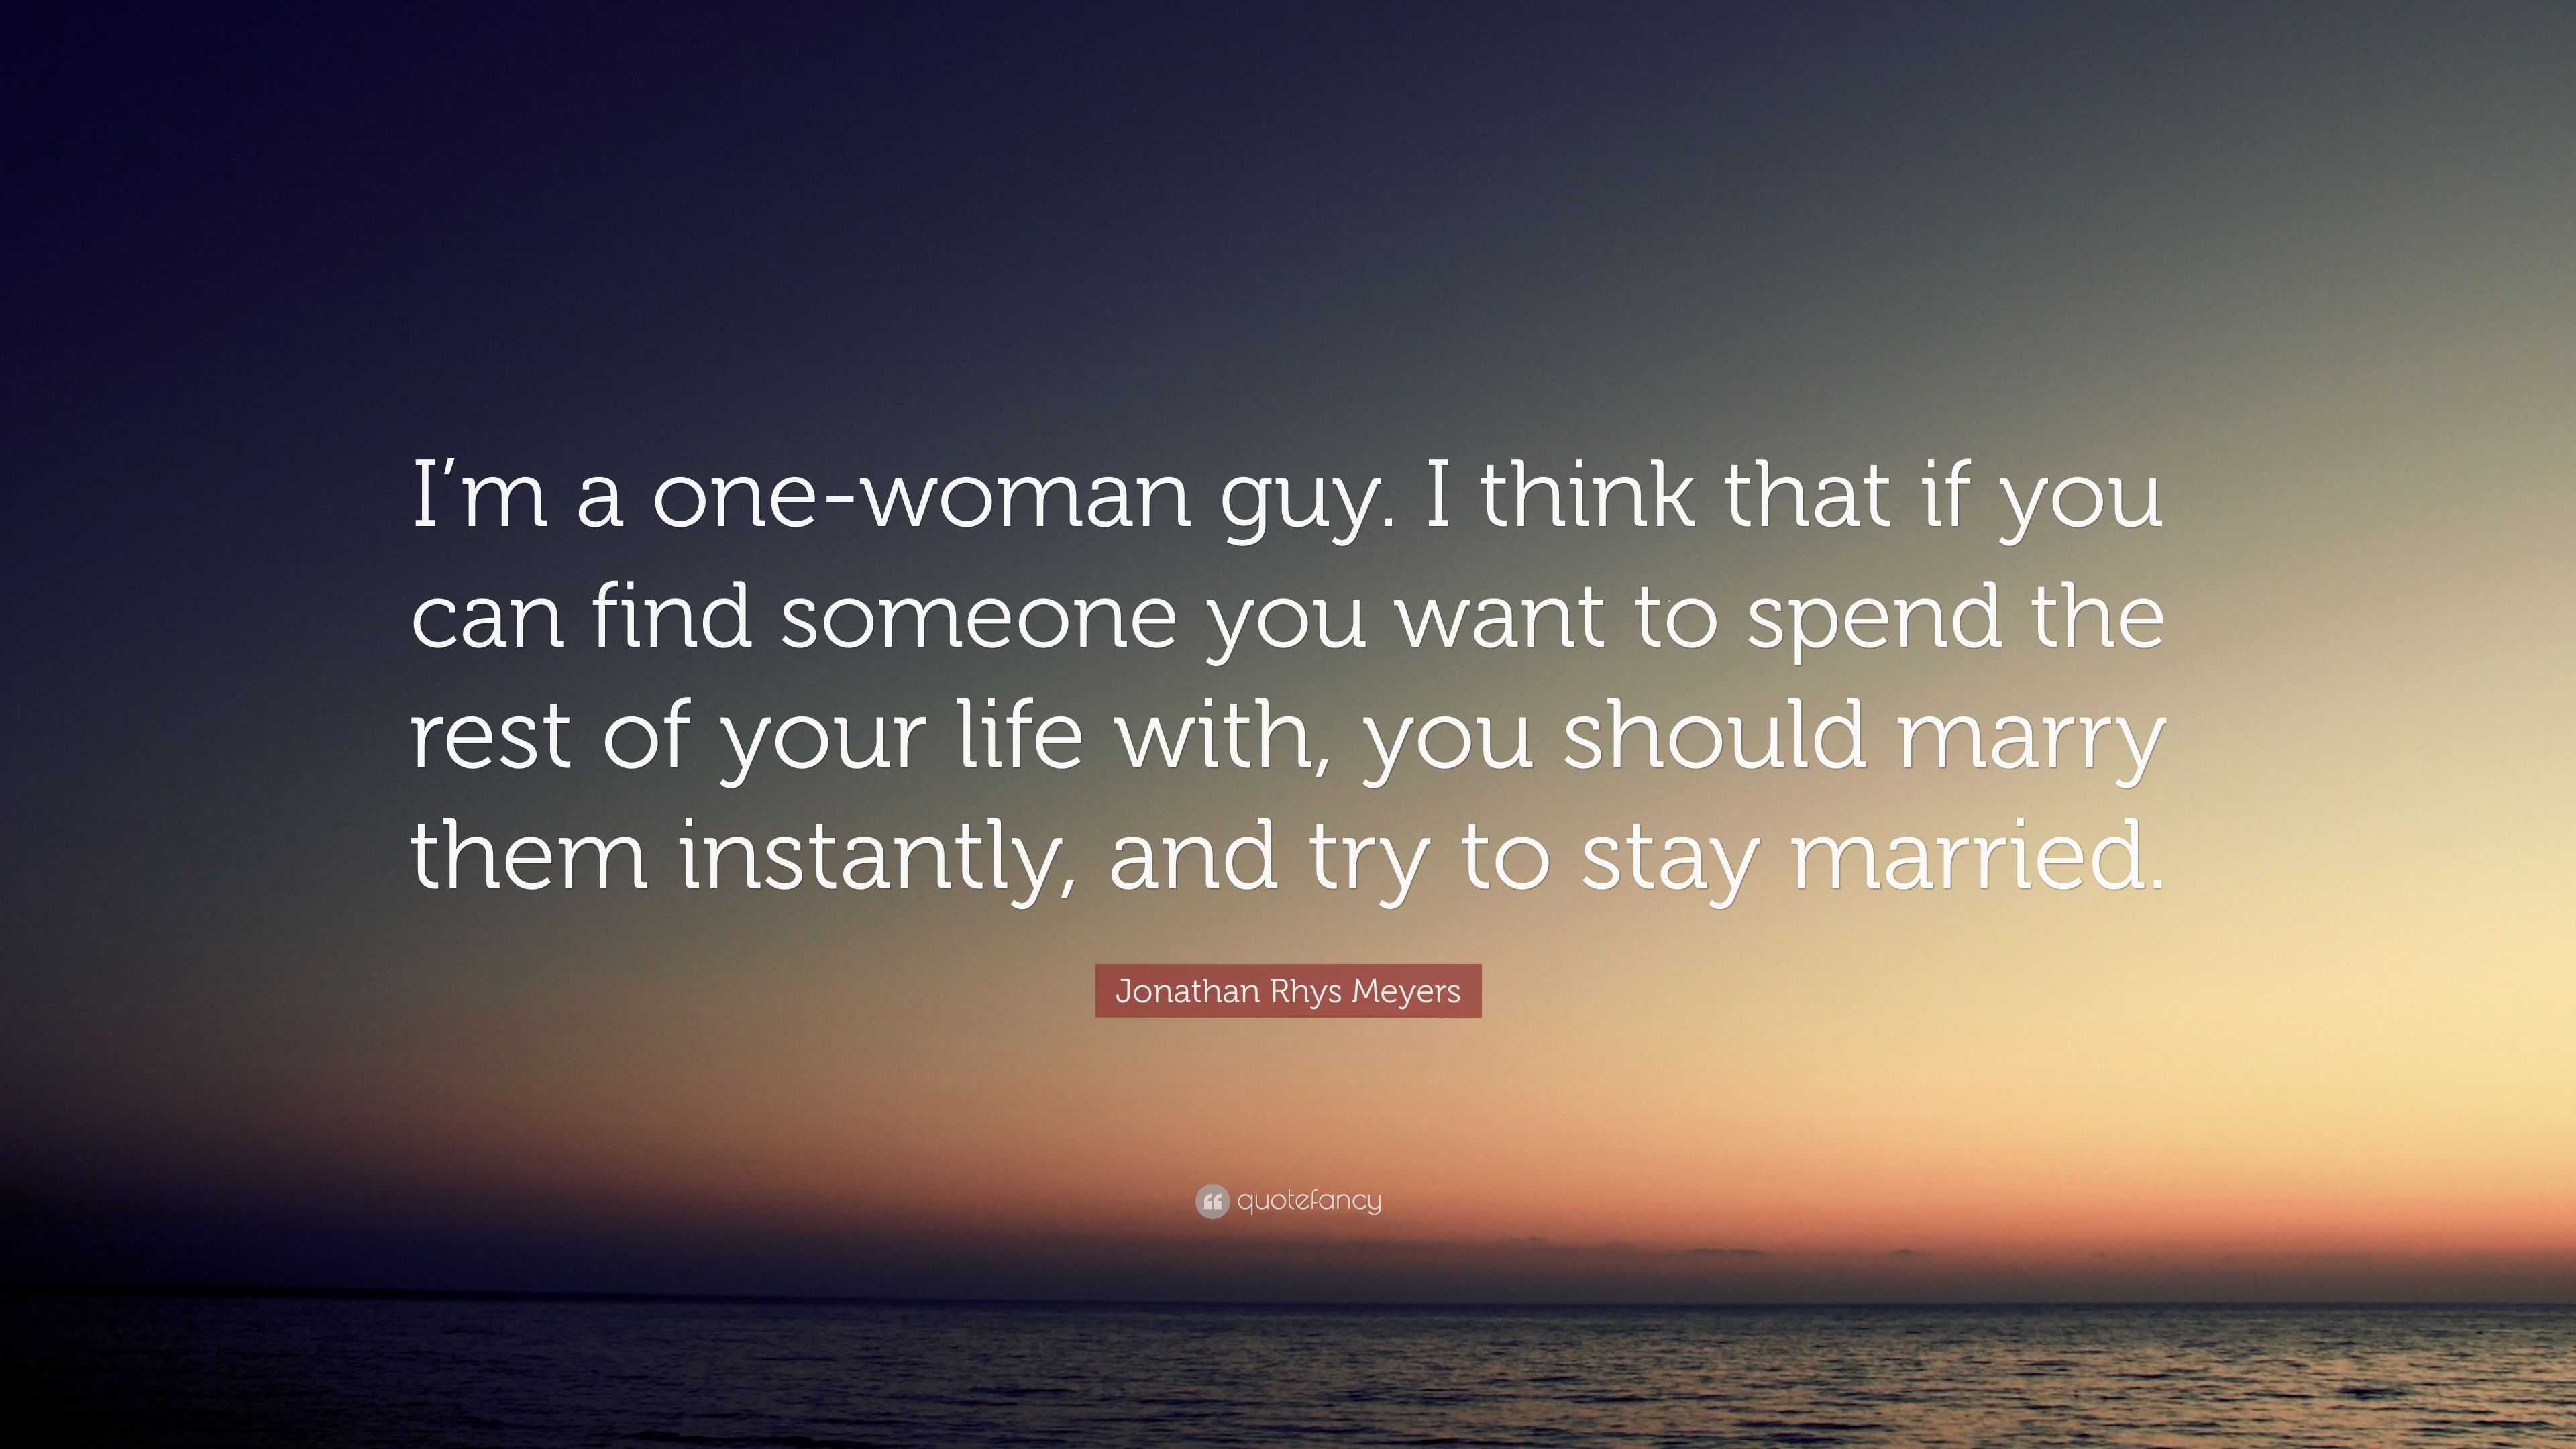 Jonathan Rhys Meyers Quote: “I’m a one-woman guy. I think that if you ...